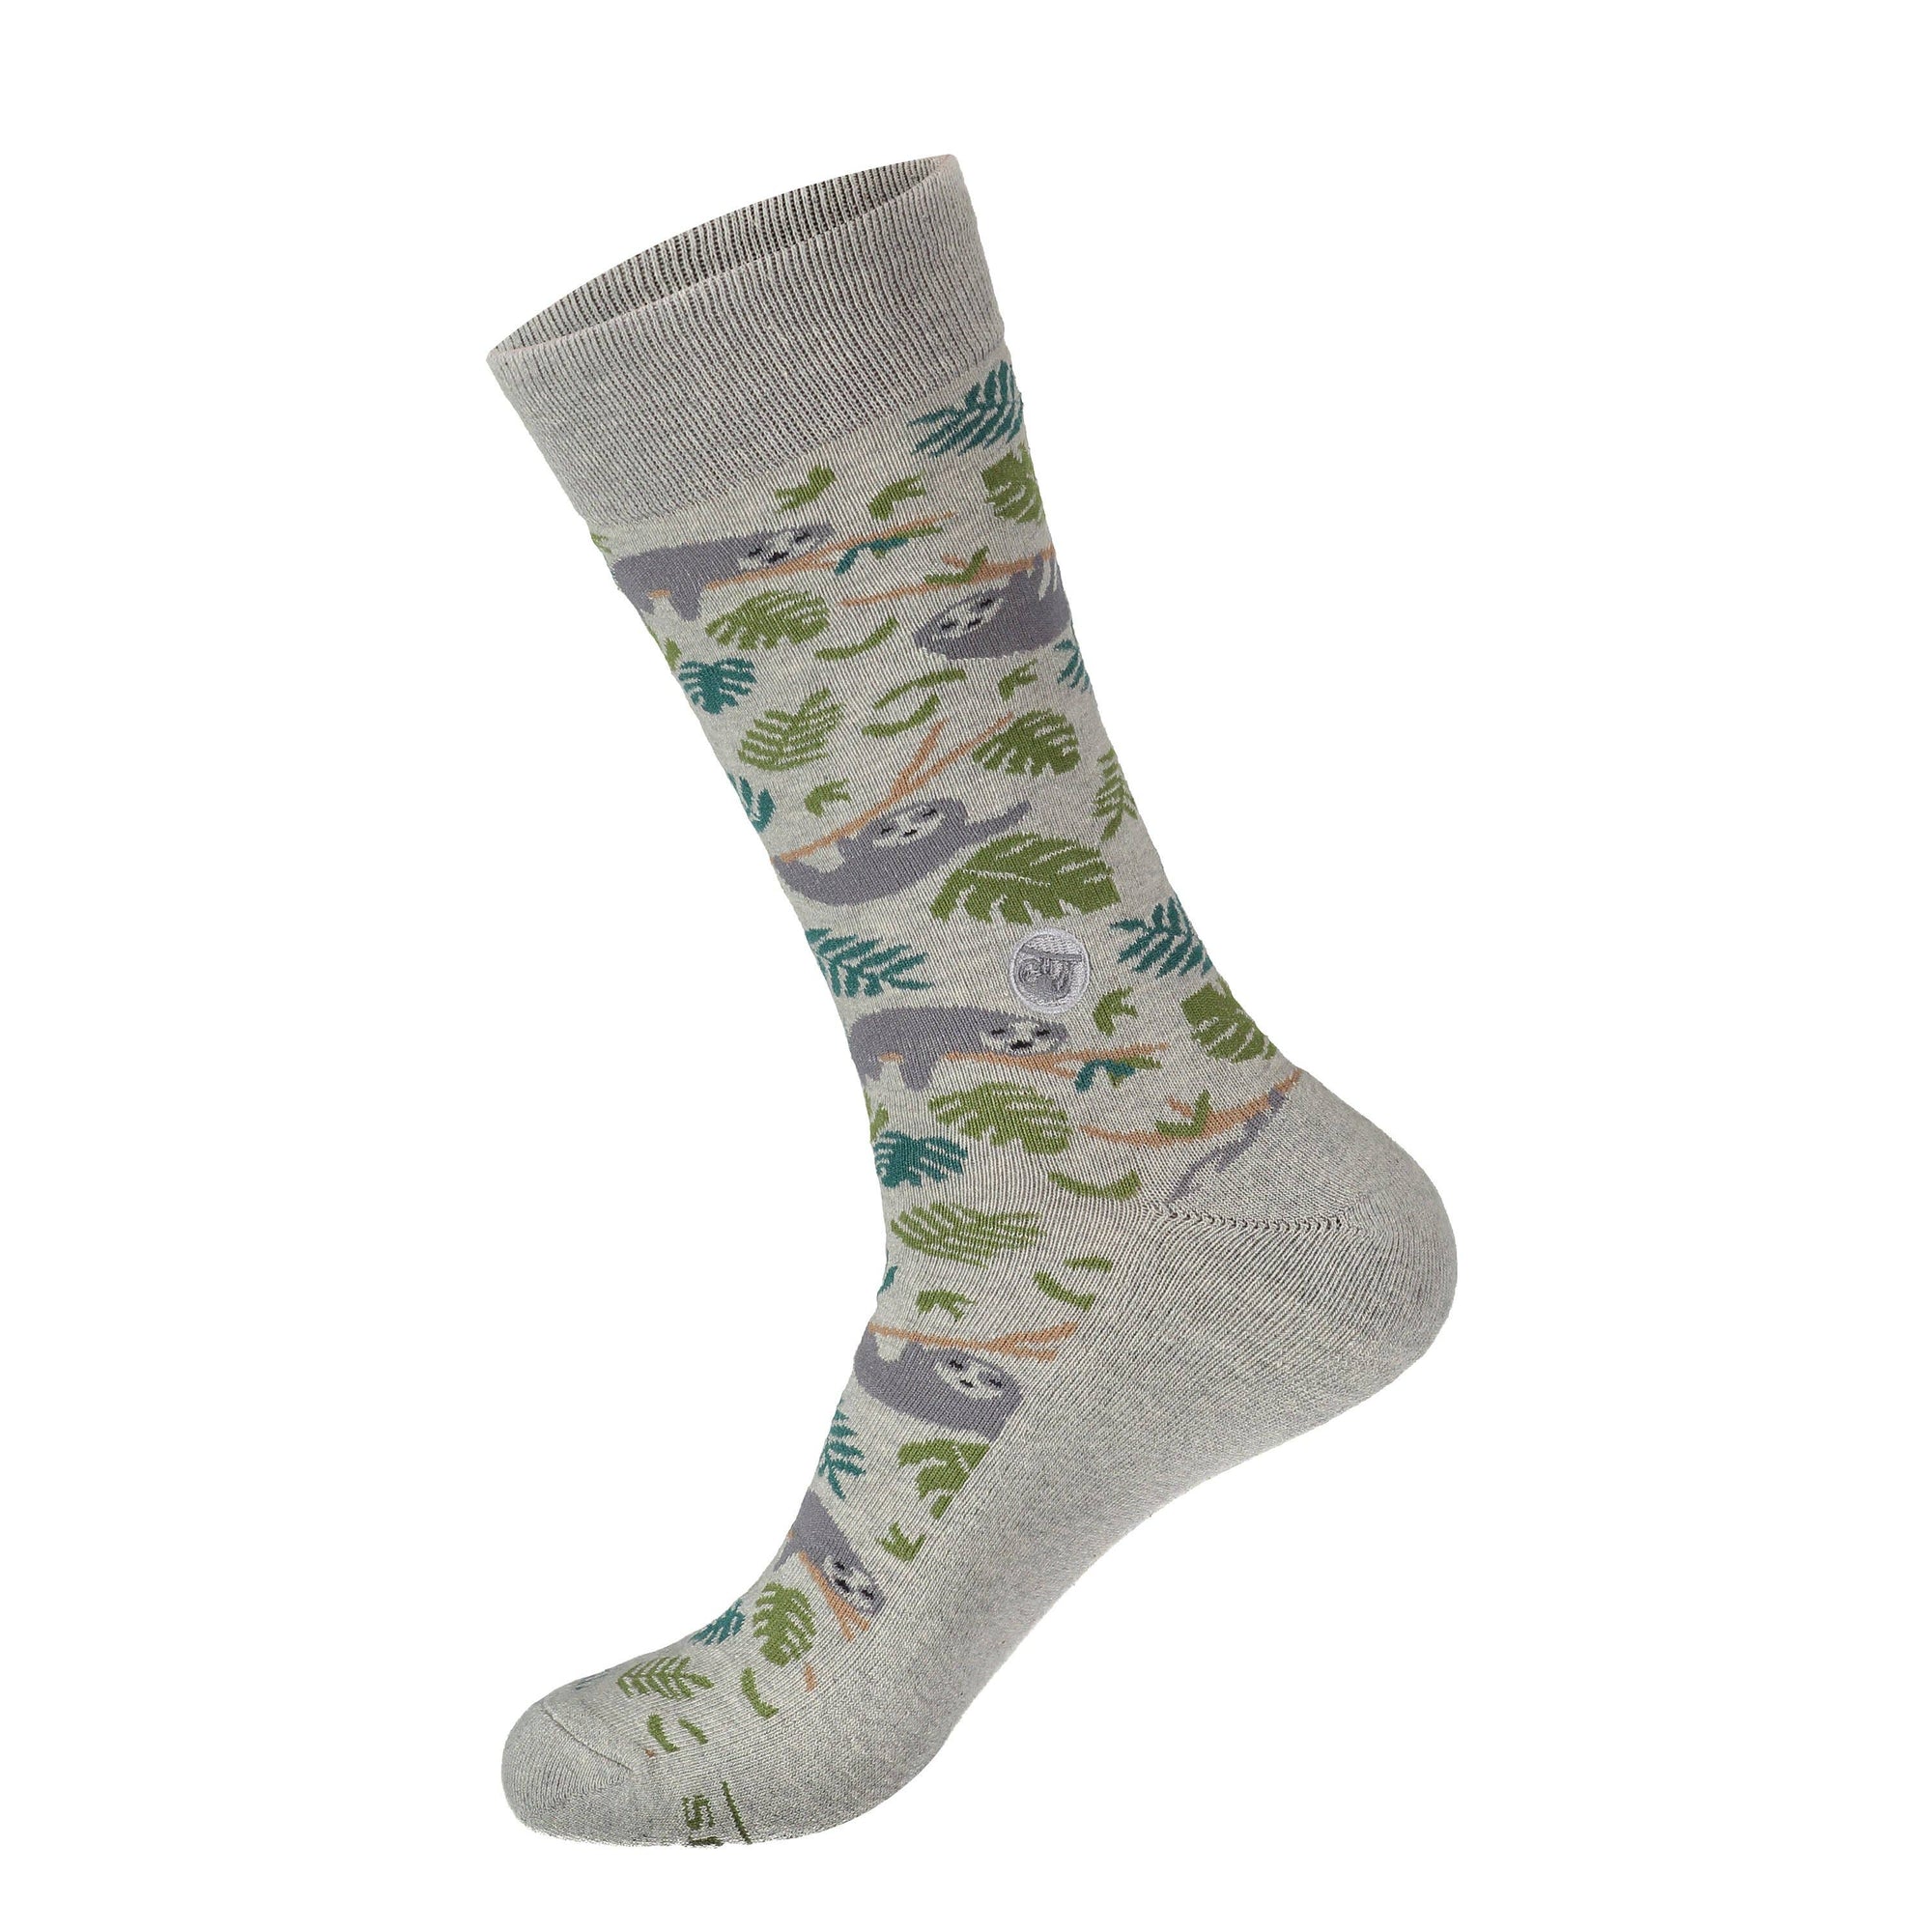 Socks that Protect Sloths (IS)